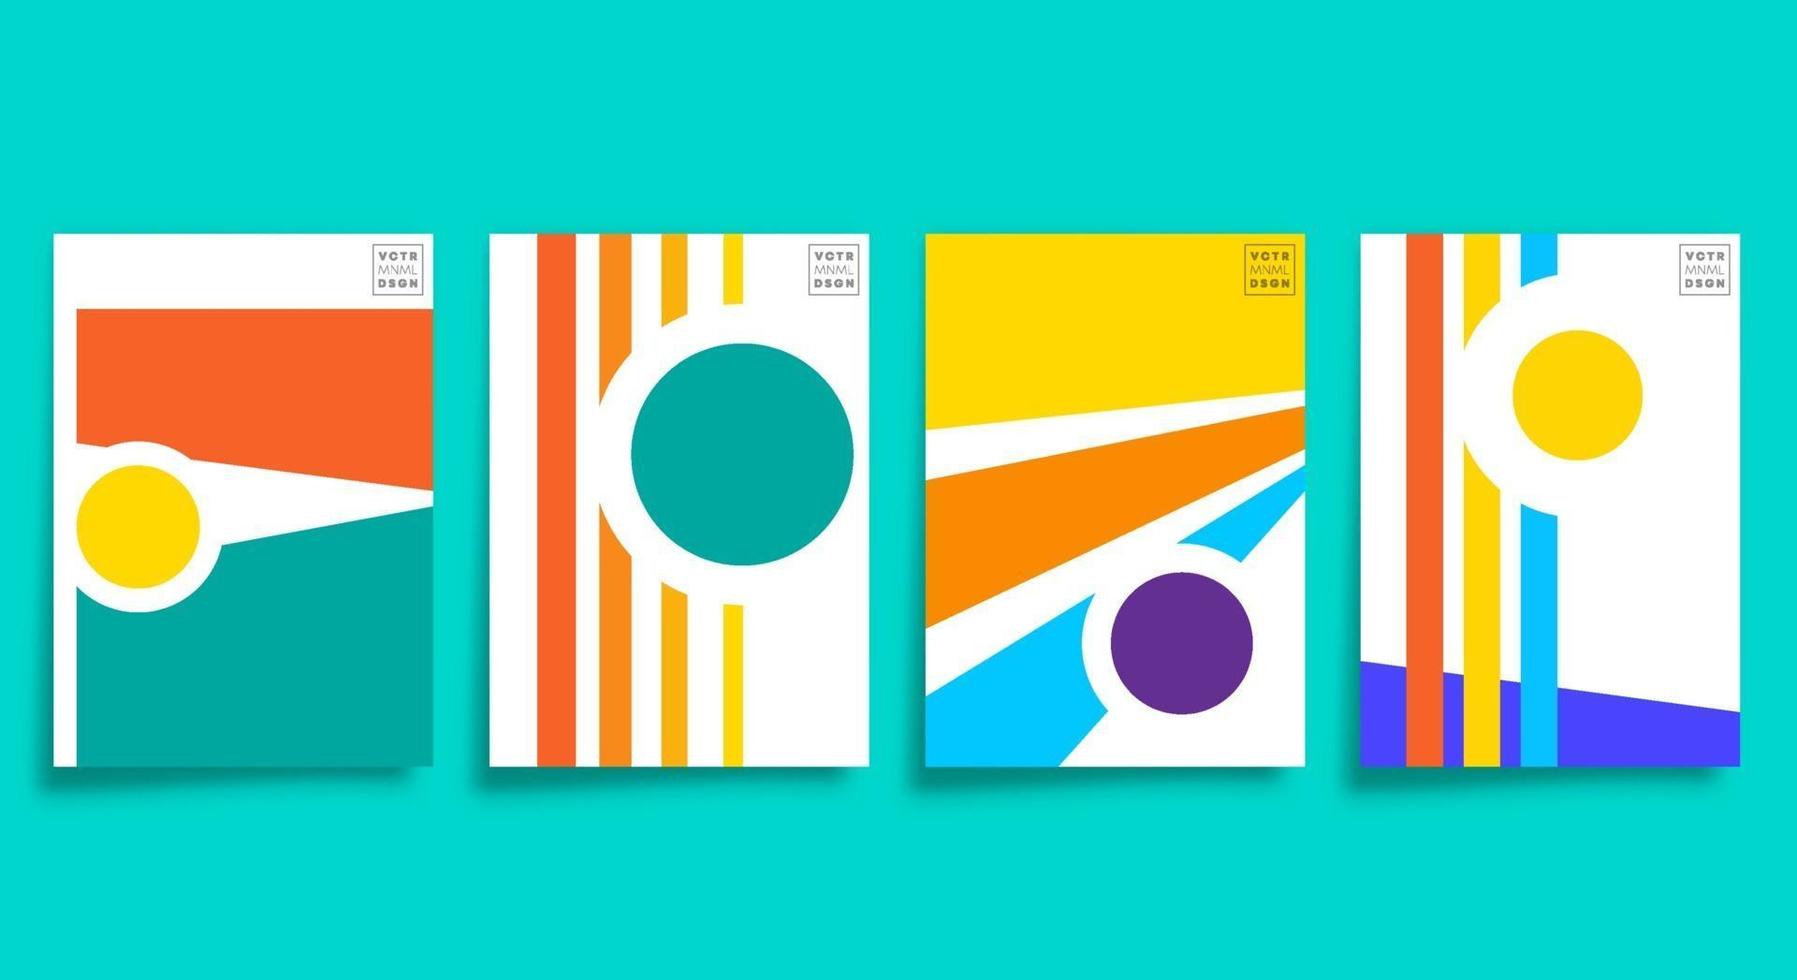 Minimal modern art design for cards, poster, flyer, brochure cover, abstract background, wallpaper, typography, or other printing products. Vector illustration.